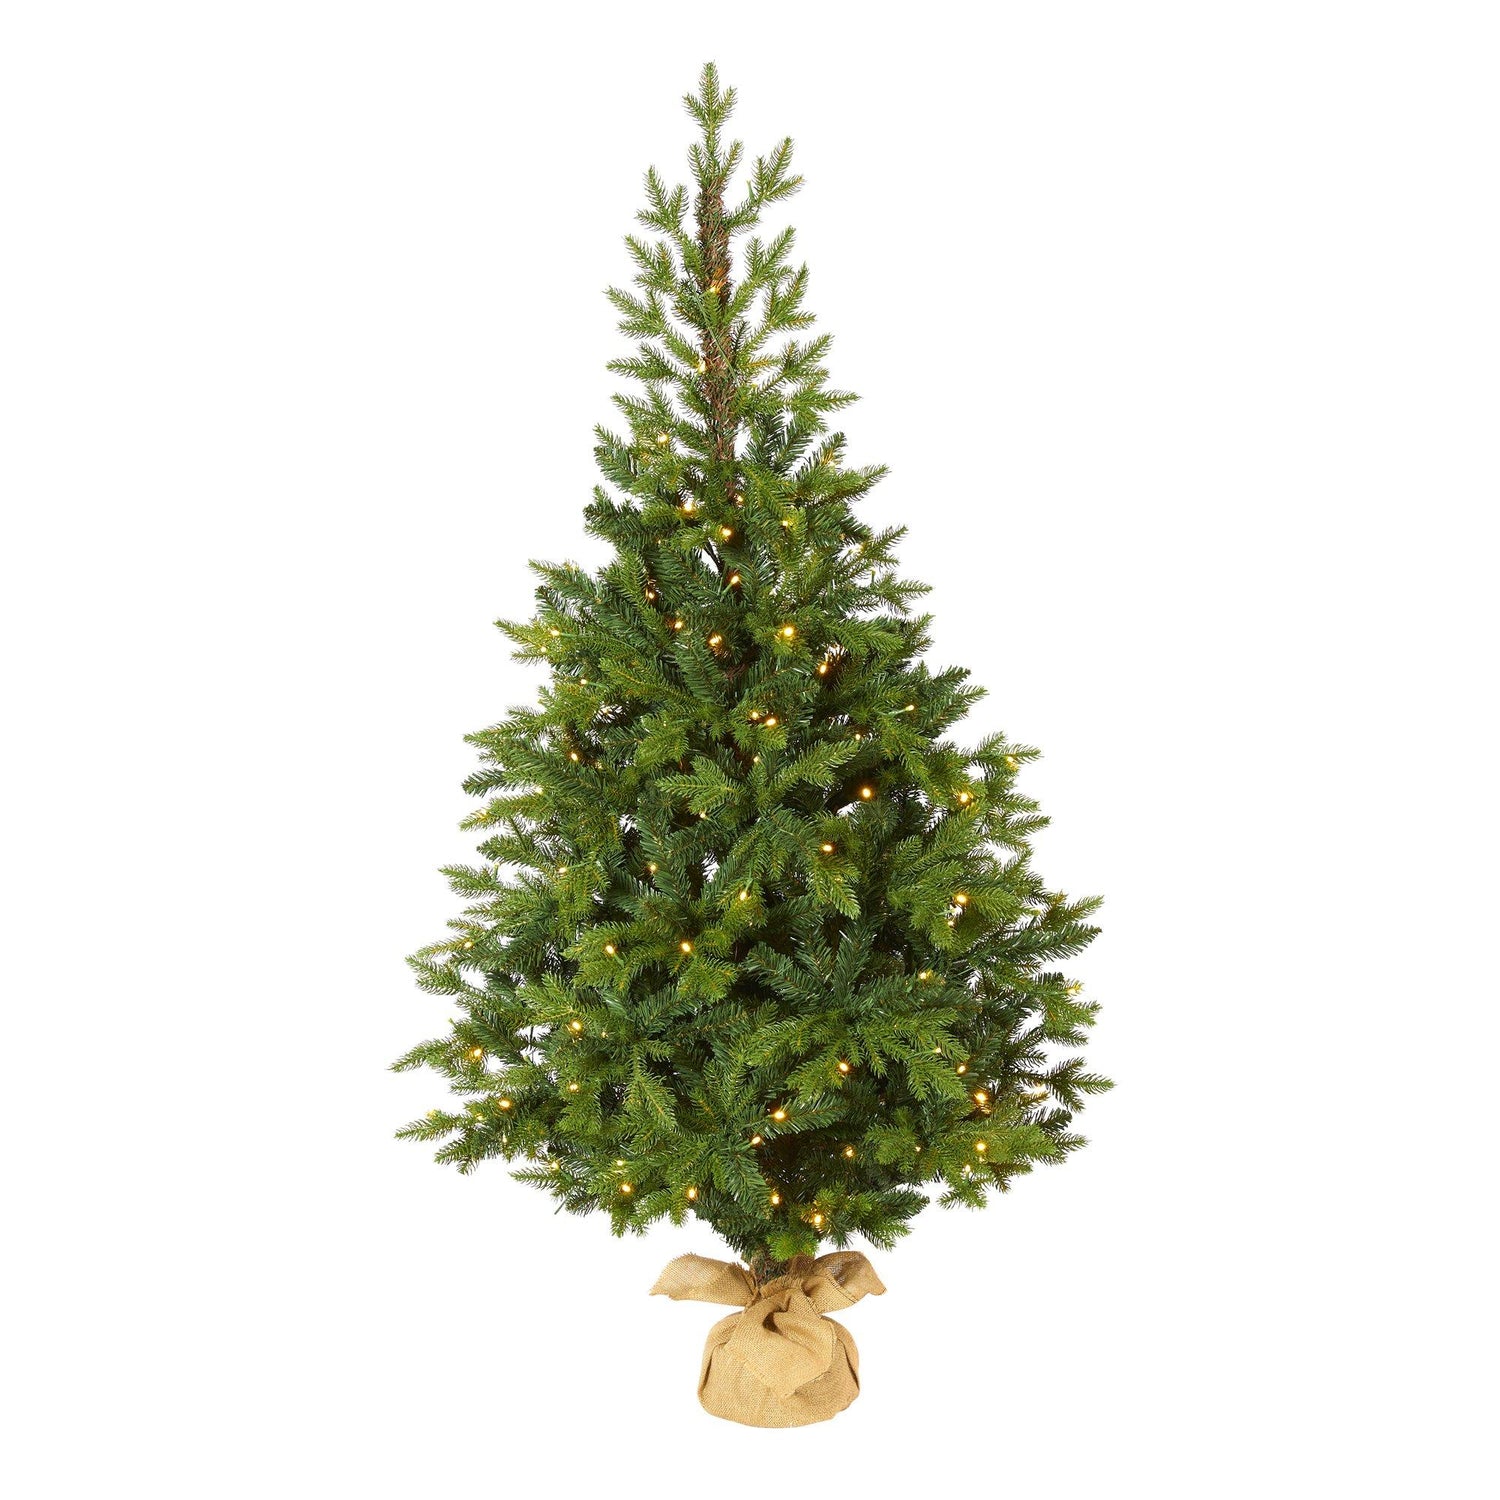 5’ Fraser Fir “Natural Look” Artificial Christmas Tree with 190 Clear LED Lights, a Burlap Base and 1217 Bendable Branches